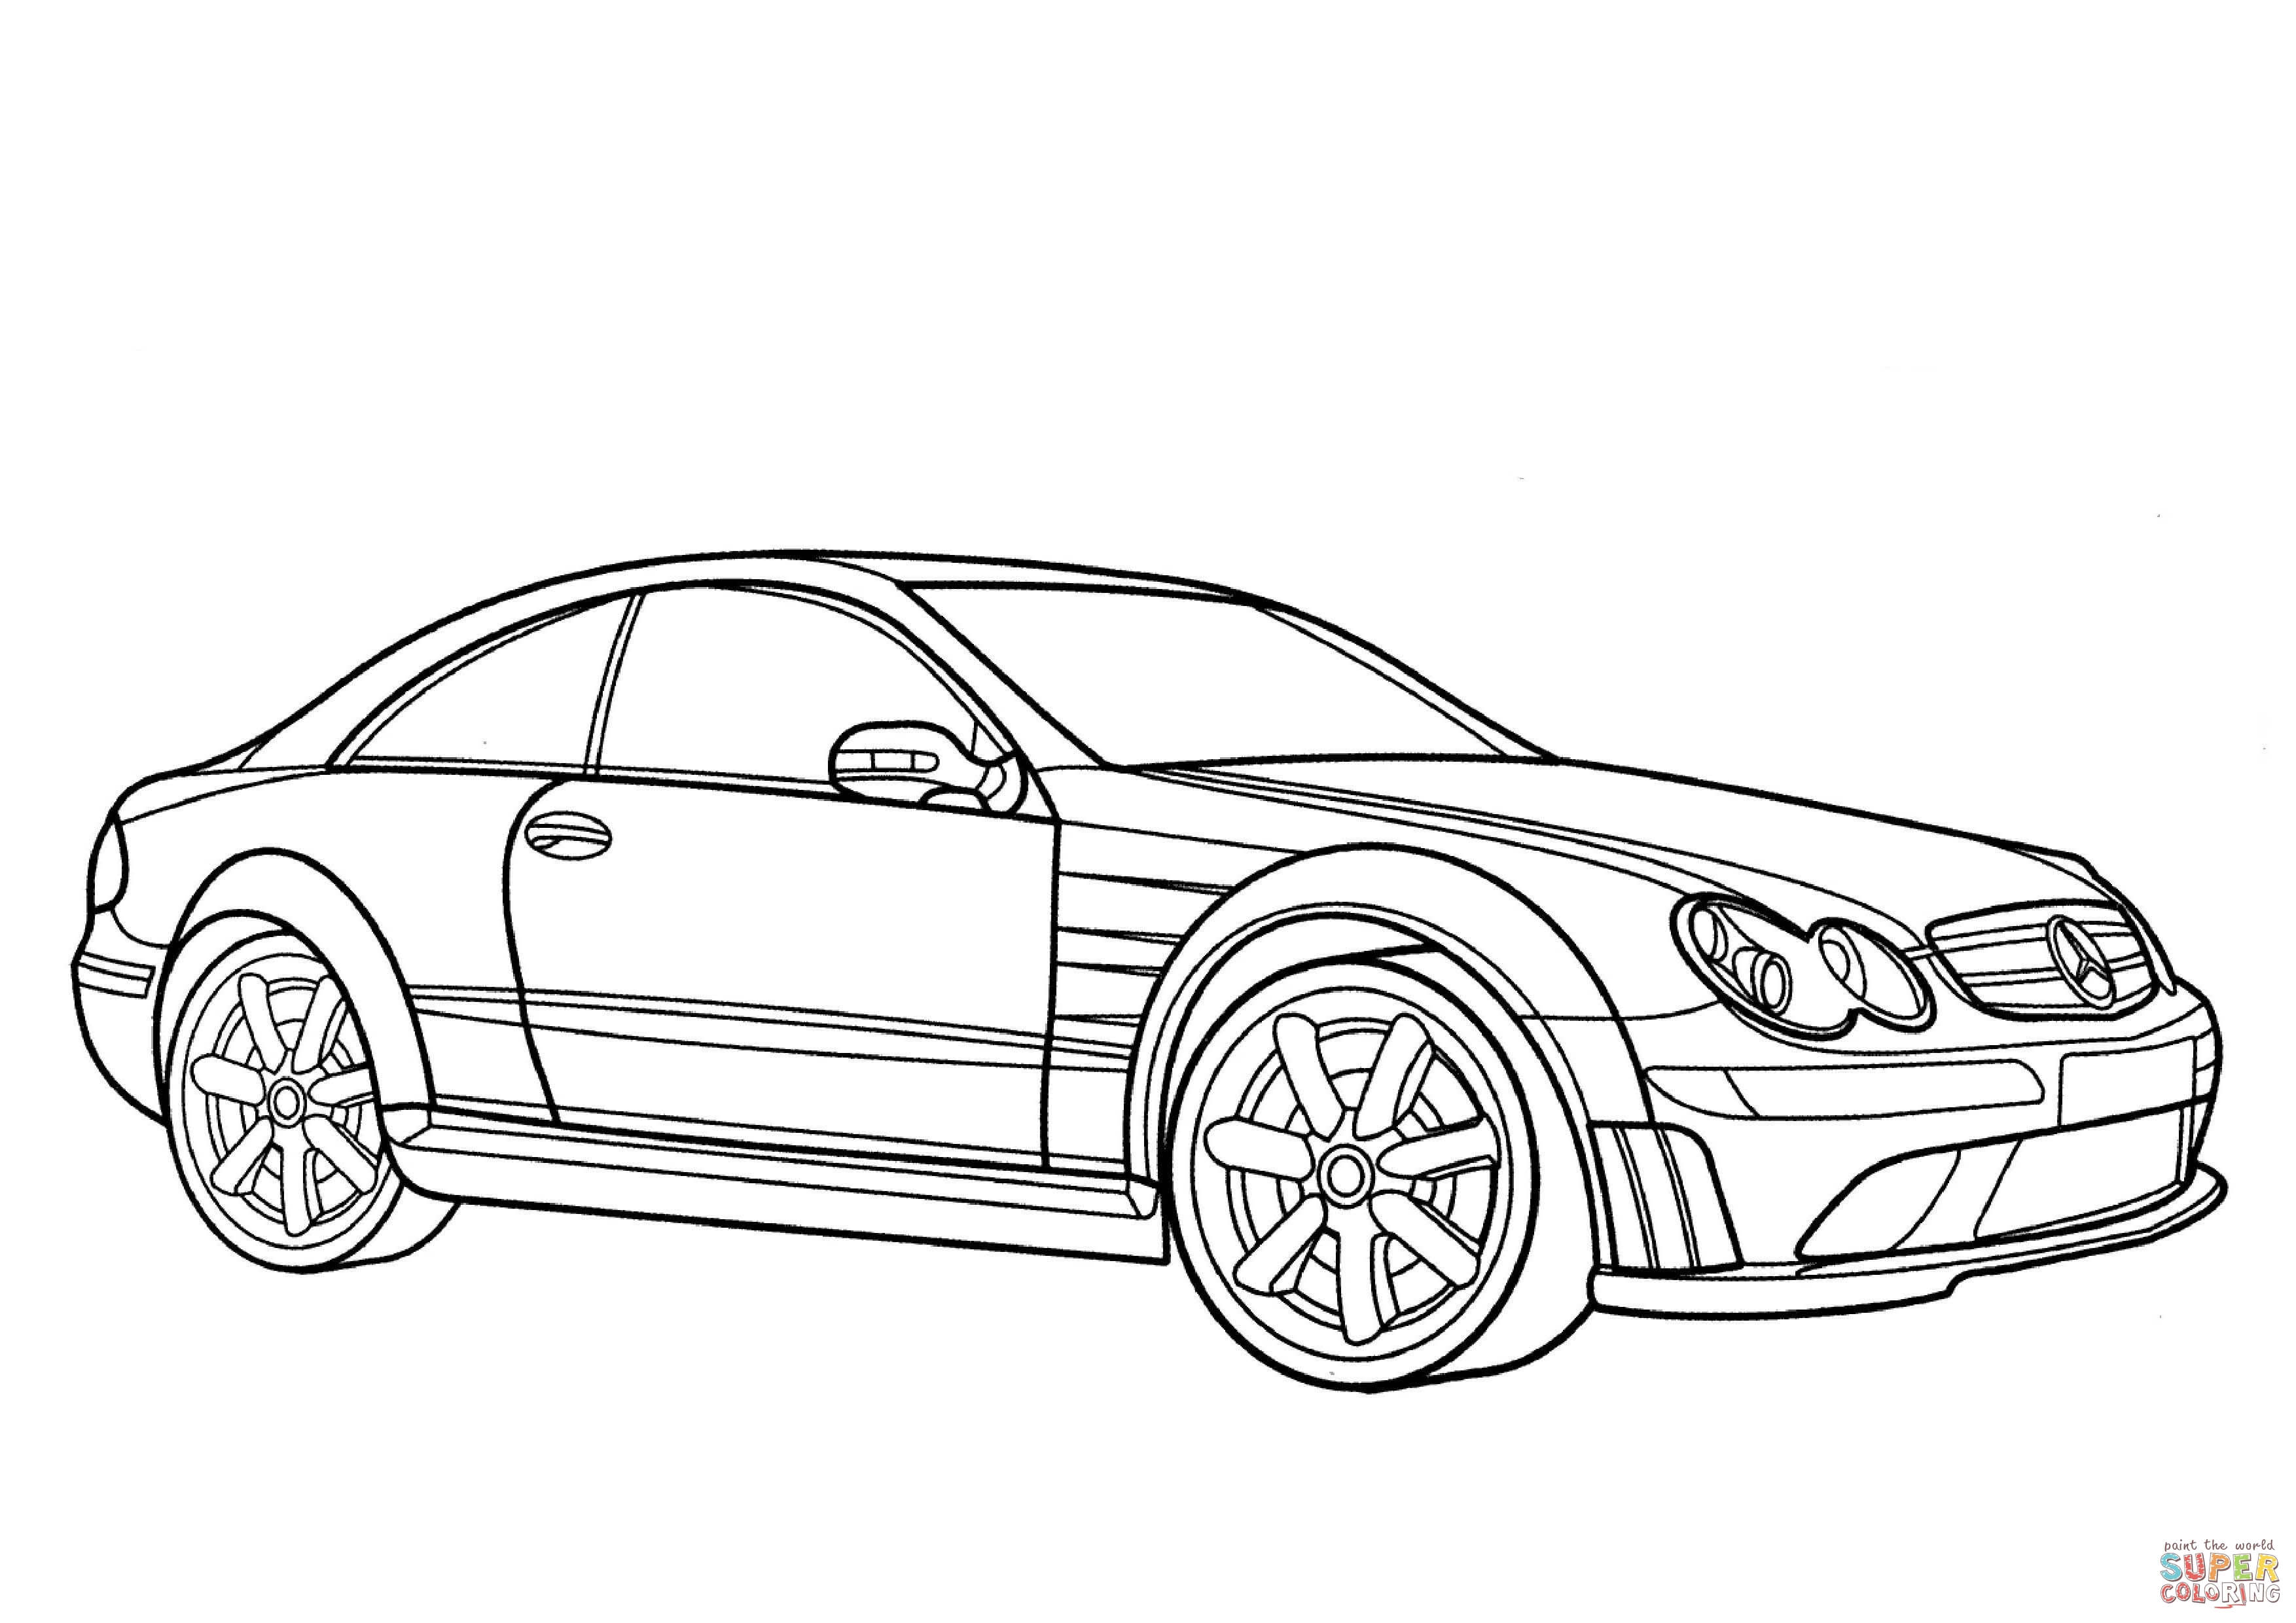 mercedes drawing at getdrawings  free for personal